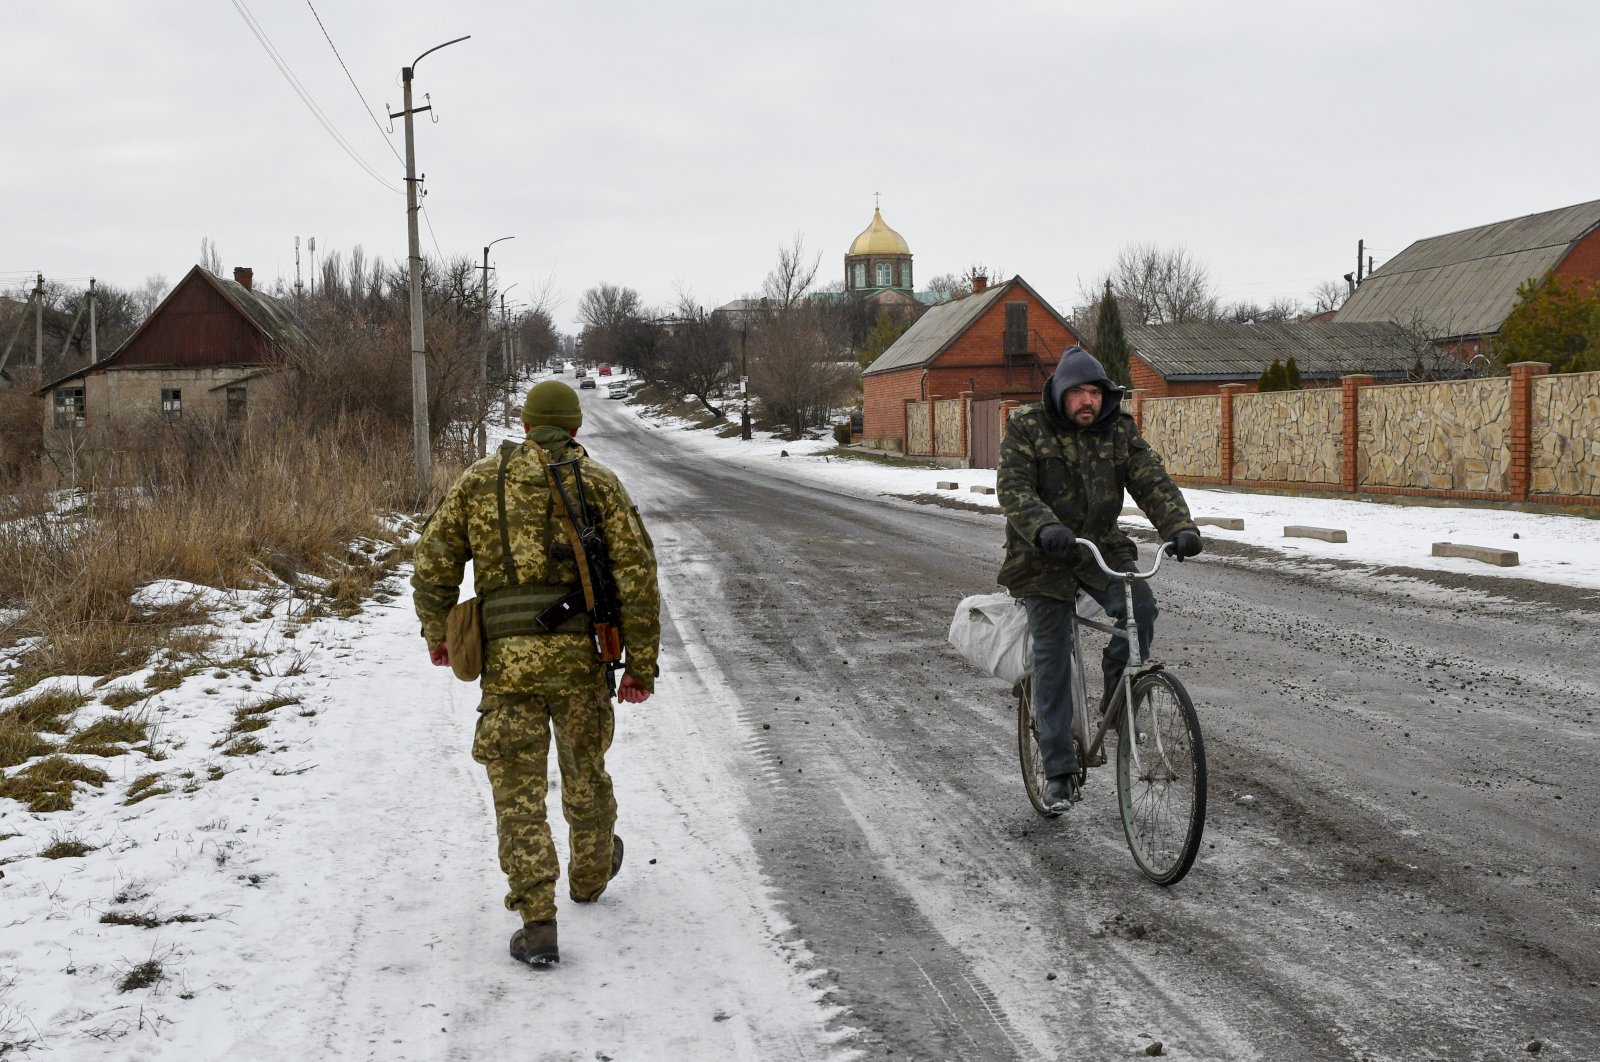 A Ukrainian service officer patrols a street near the front line with Russia-backed separatists in the village of Verkhnotoretske in the Yasynuvata district, Donetsk region, eastern Ukraine, Jan. 22, 2022. (AP Photo)